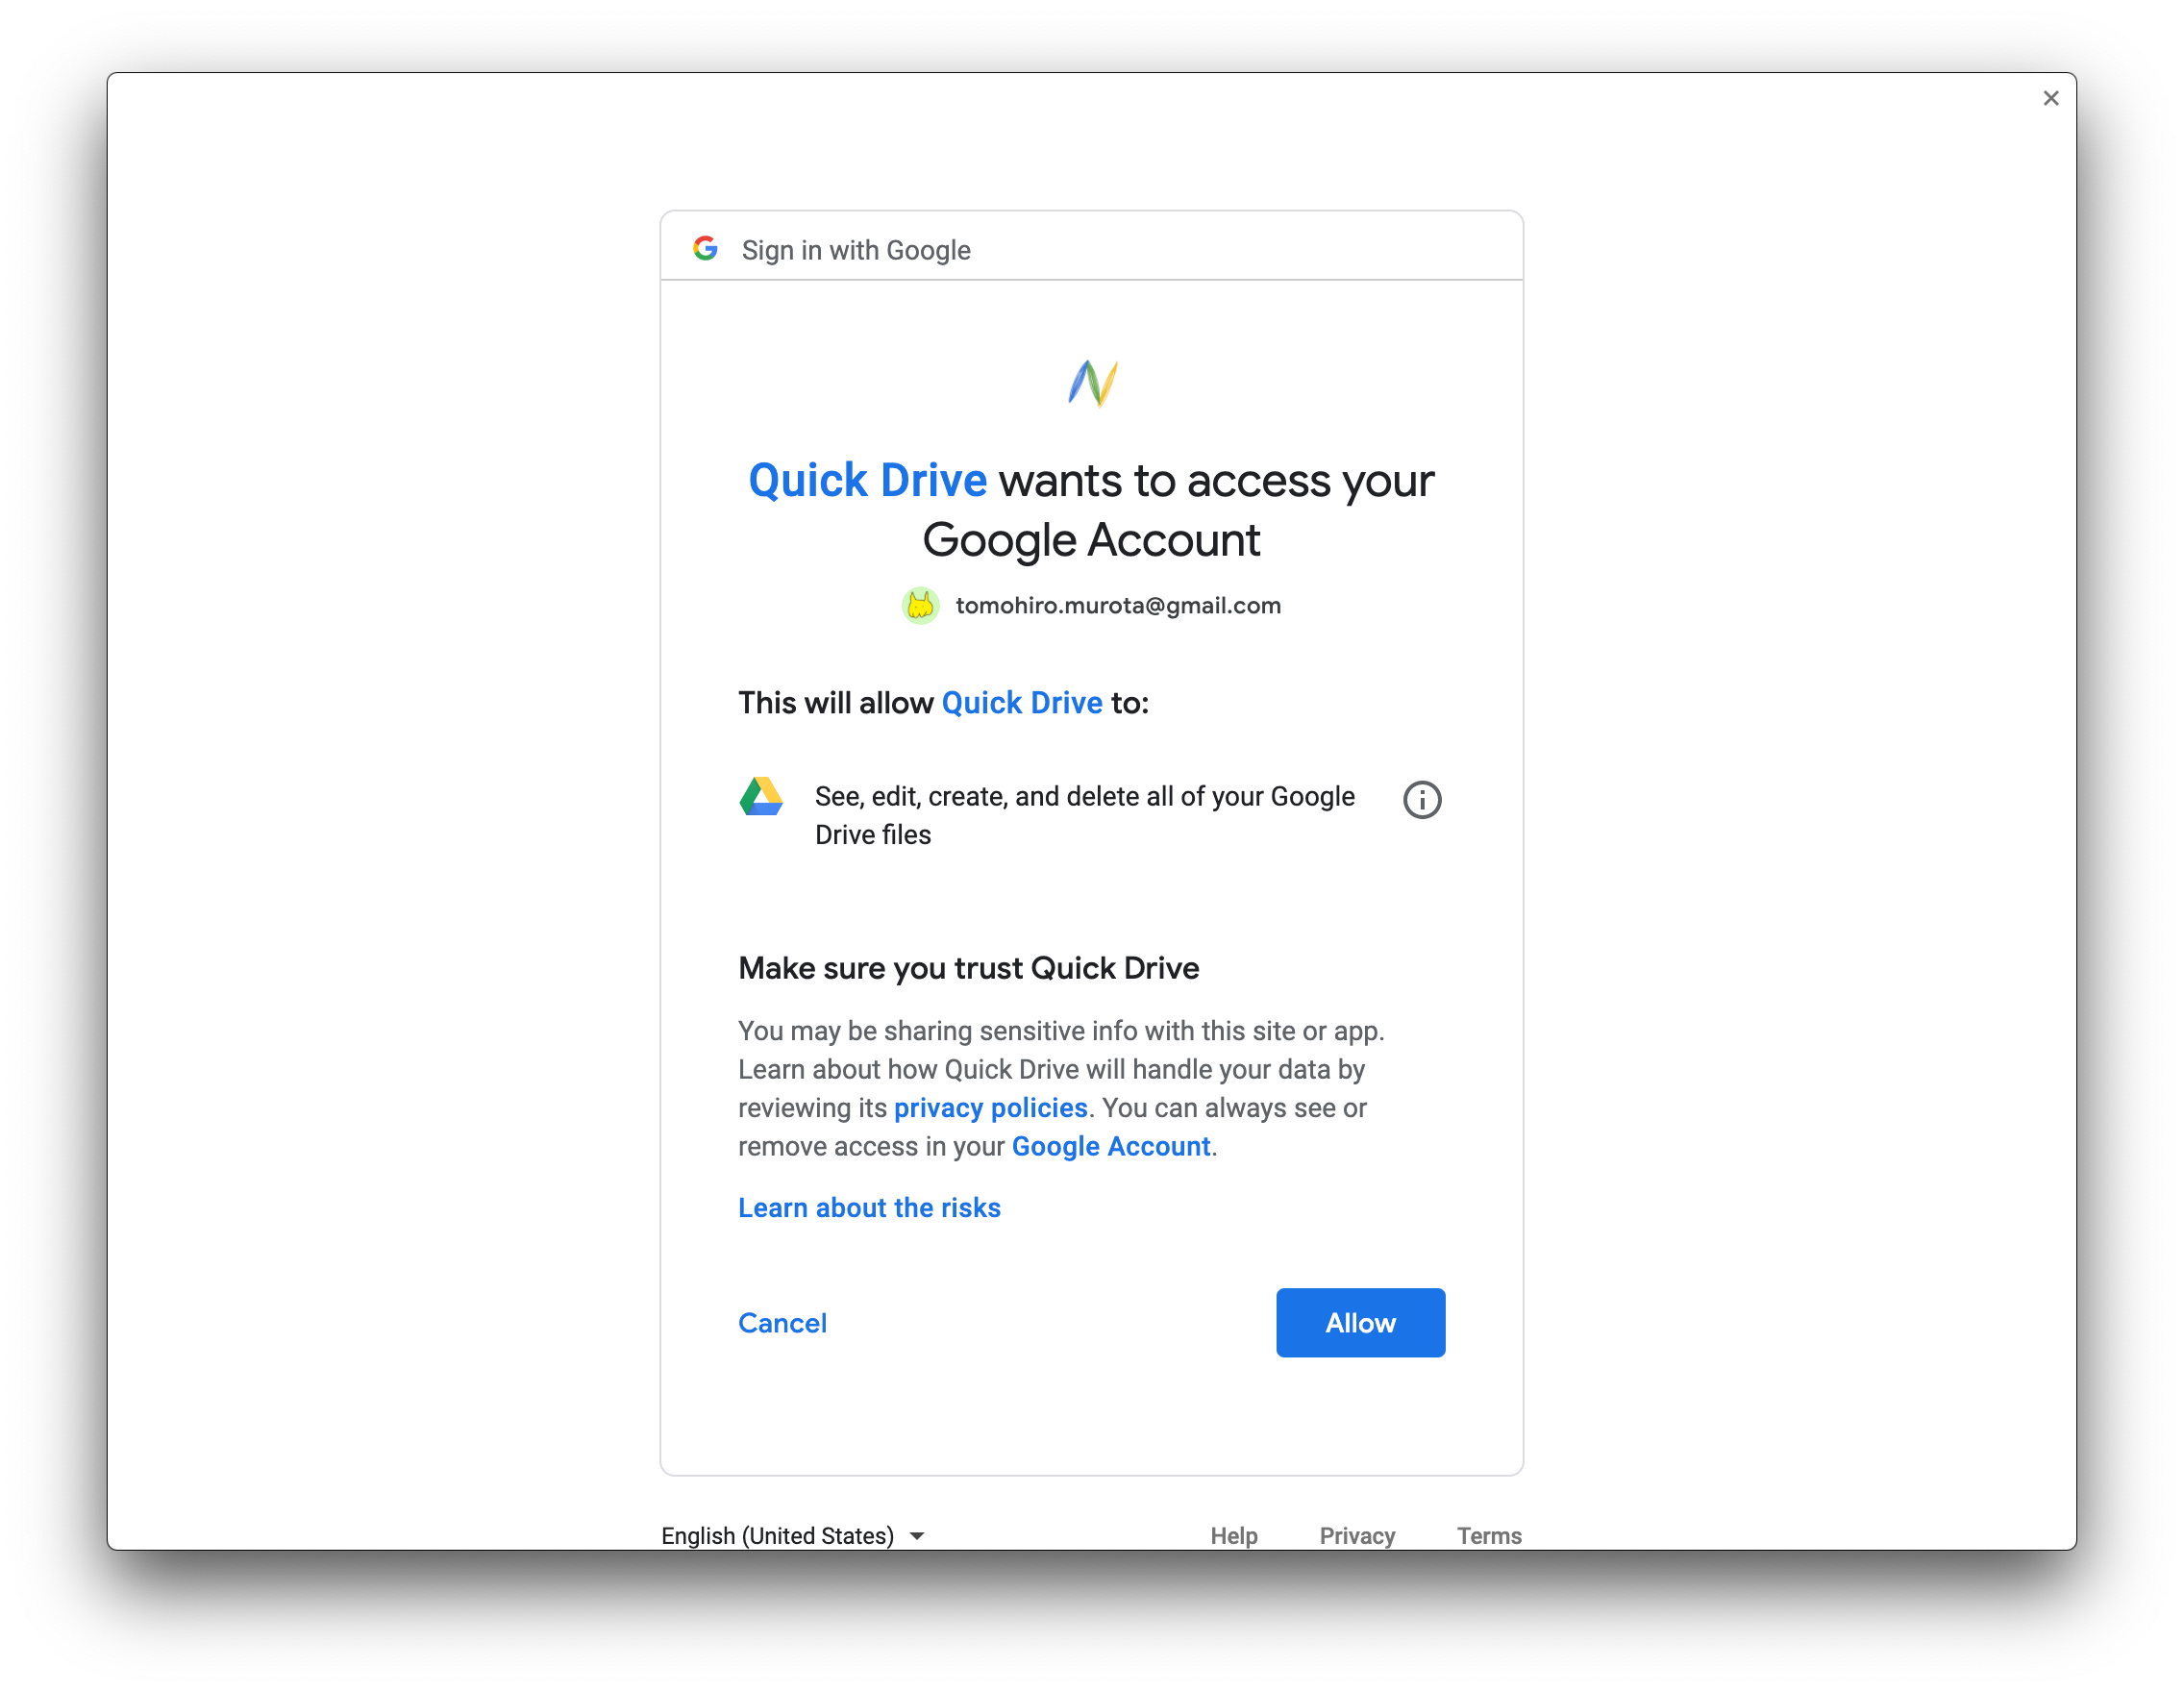 google_oauth_flow_consent_screen.png